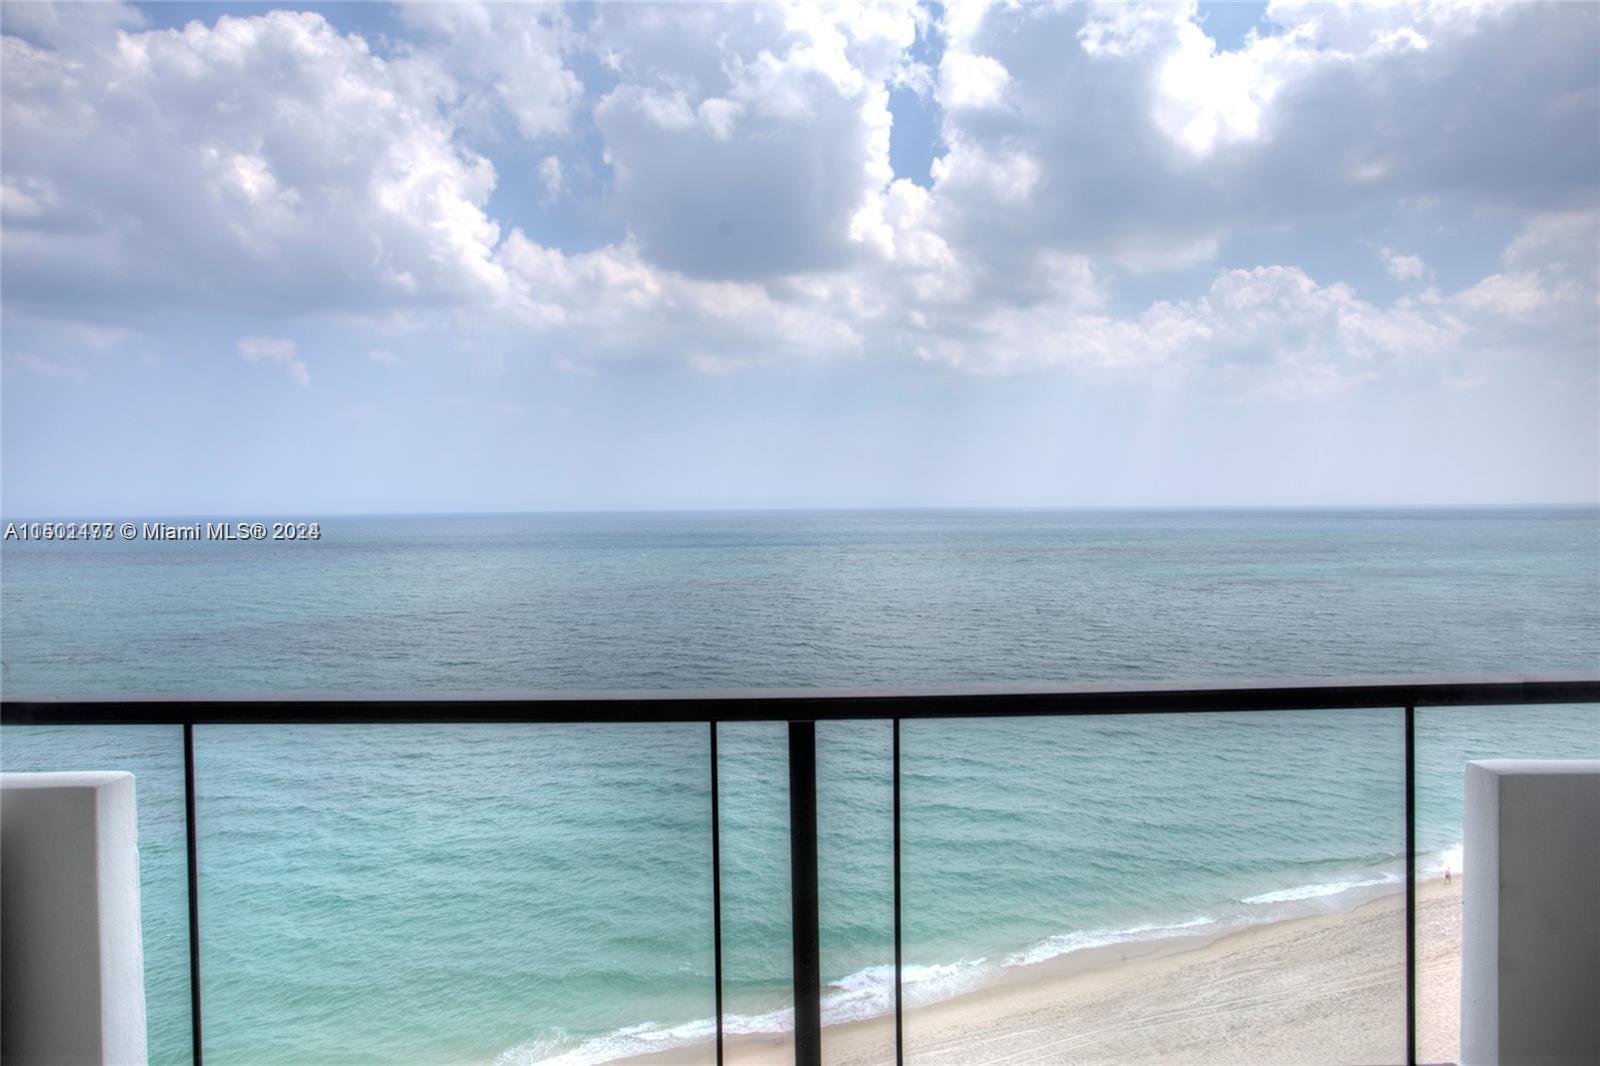 Own a slice of heaven with this 2-bedroom 2 baths condo with DIRECT OCEAN VIEW on the 15th floor. Wa